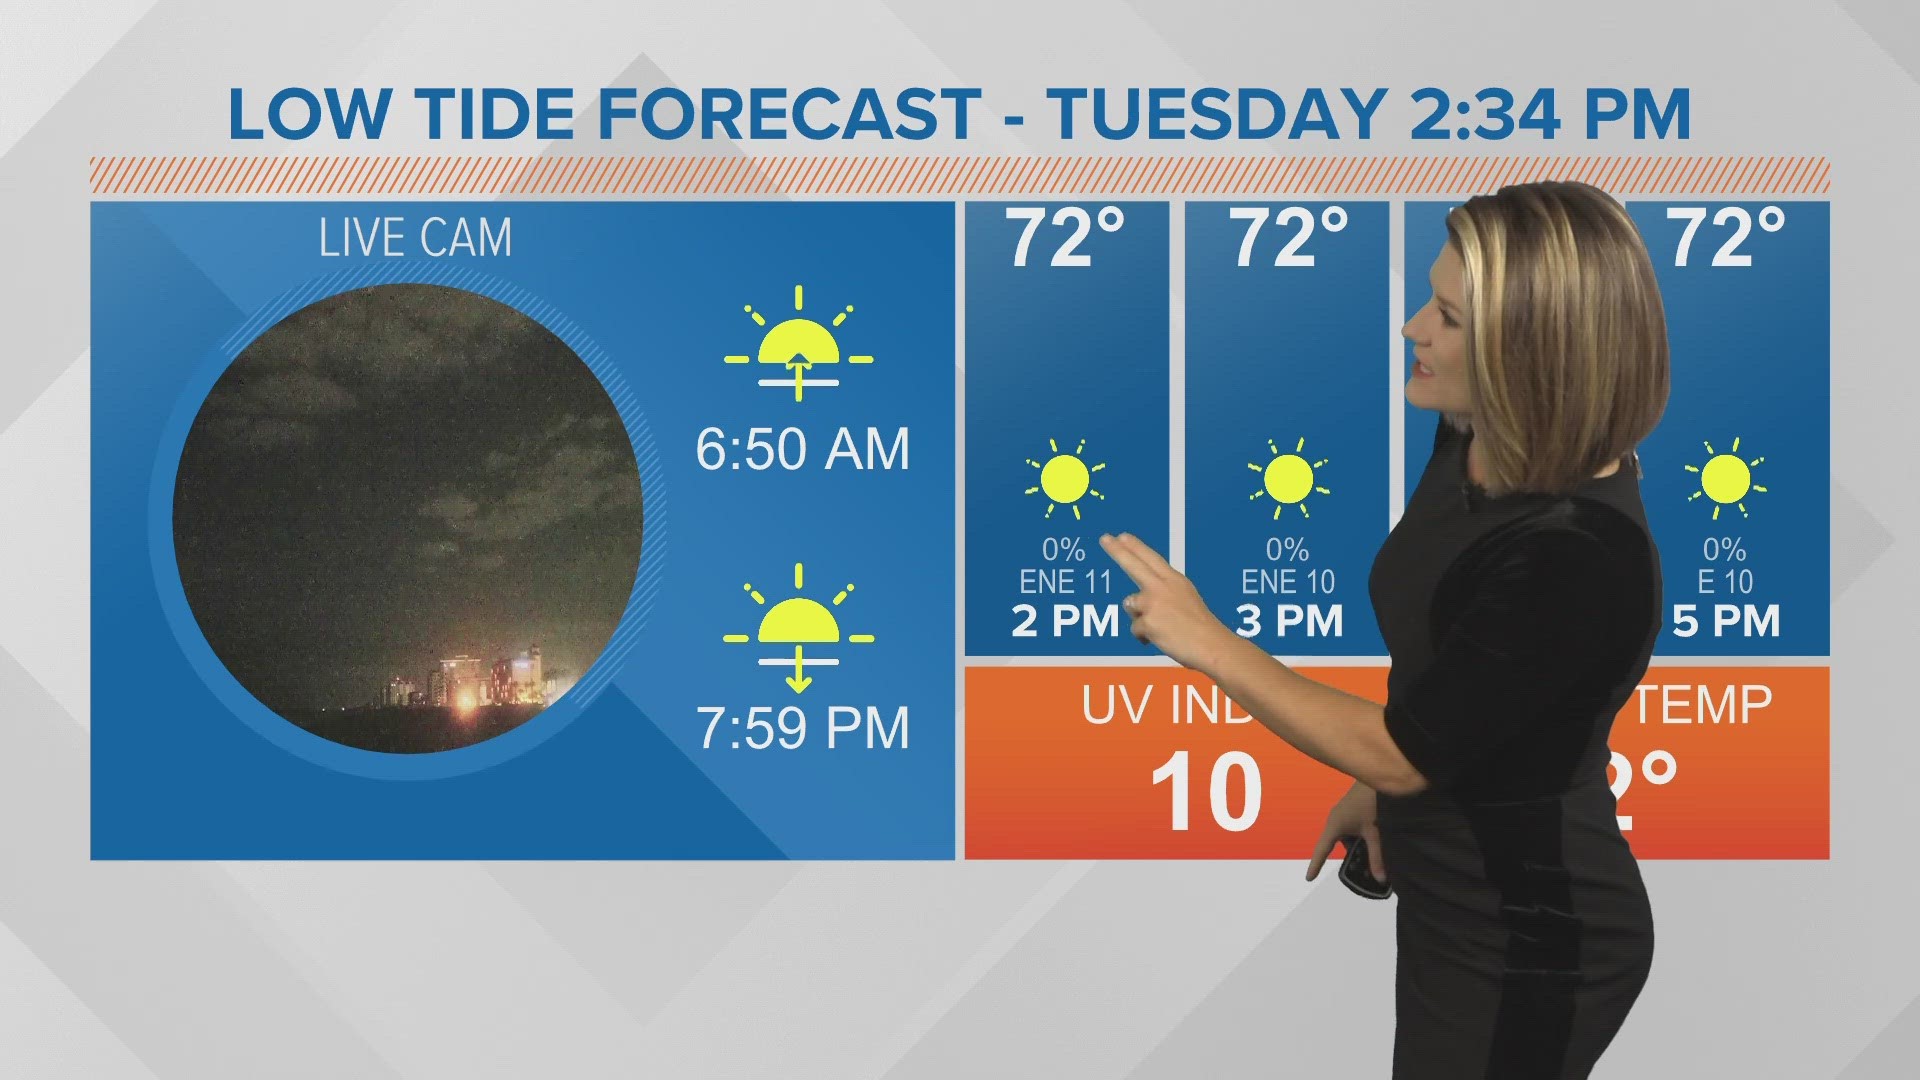 Meteorologist Lauren Rautenkranz says sunshine will continue to rule our skies in Jacksonville.